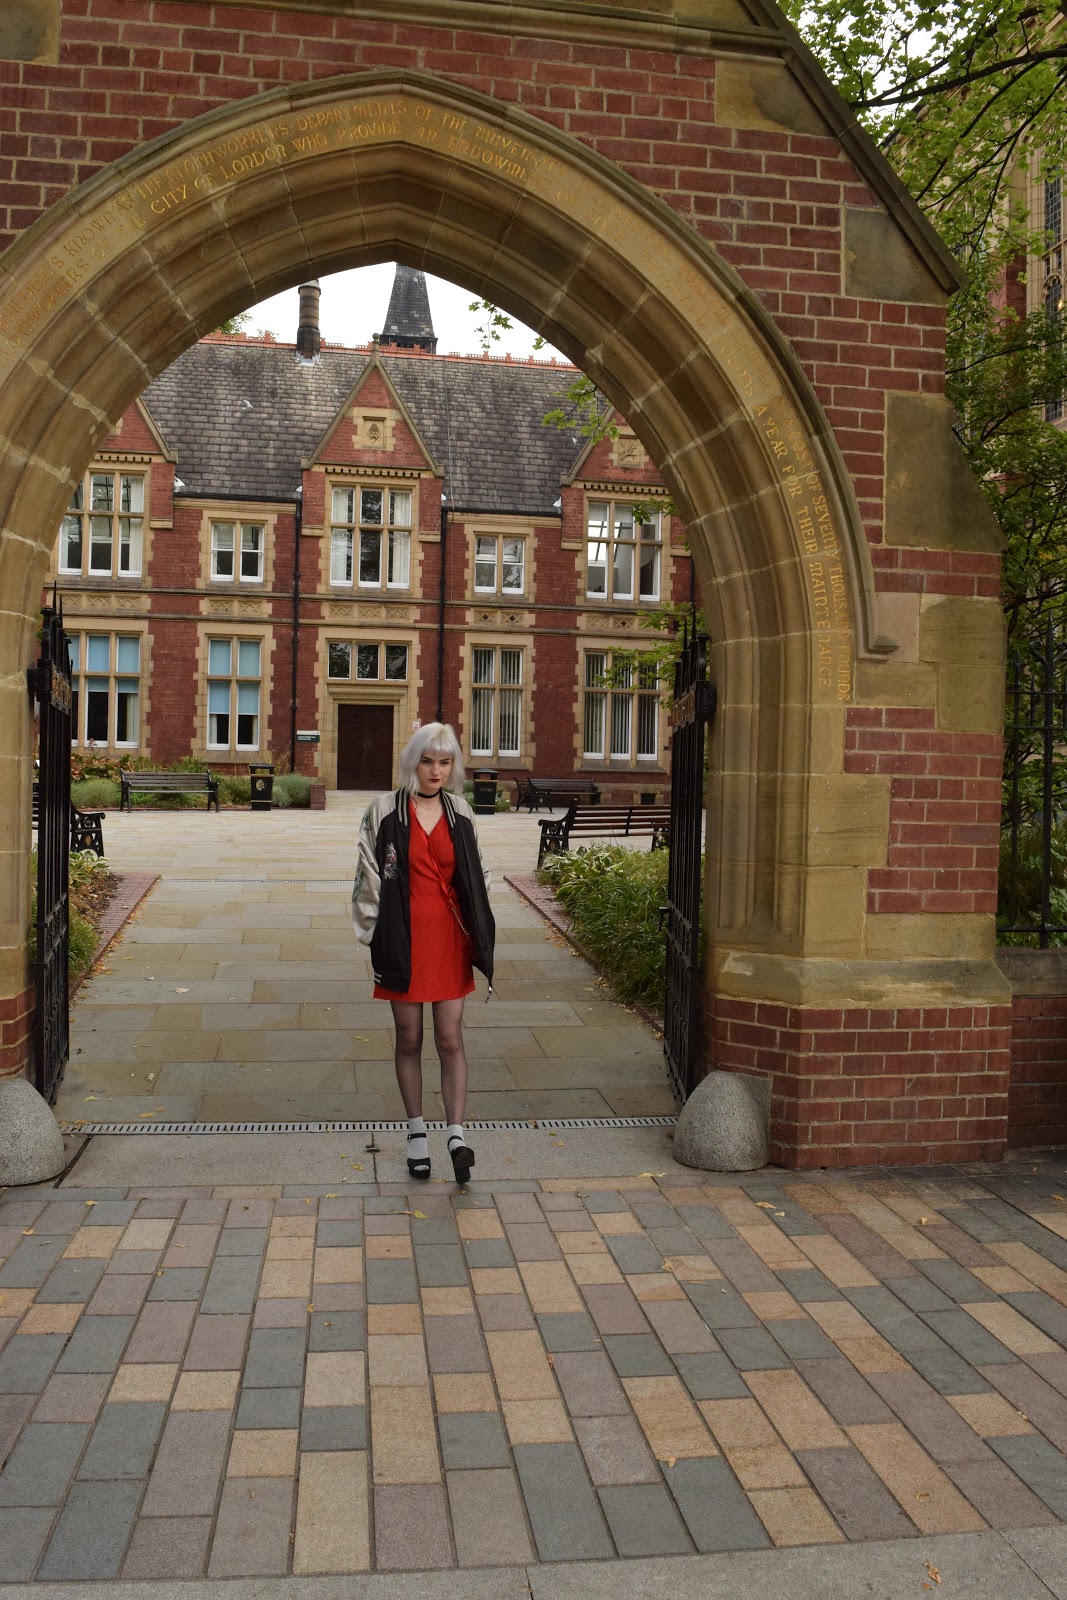 silver haired girl in red dress, heels and sukajan standing in an archway at the University of Leeds